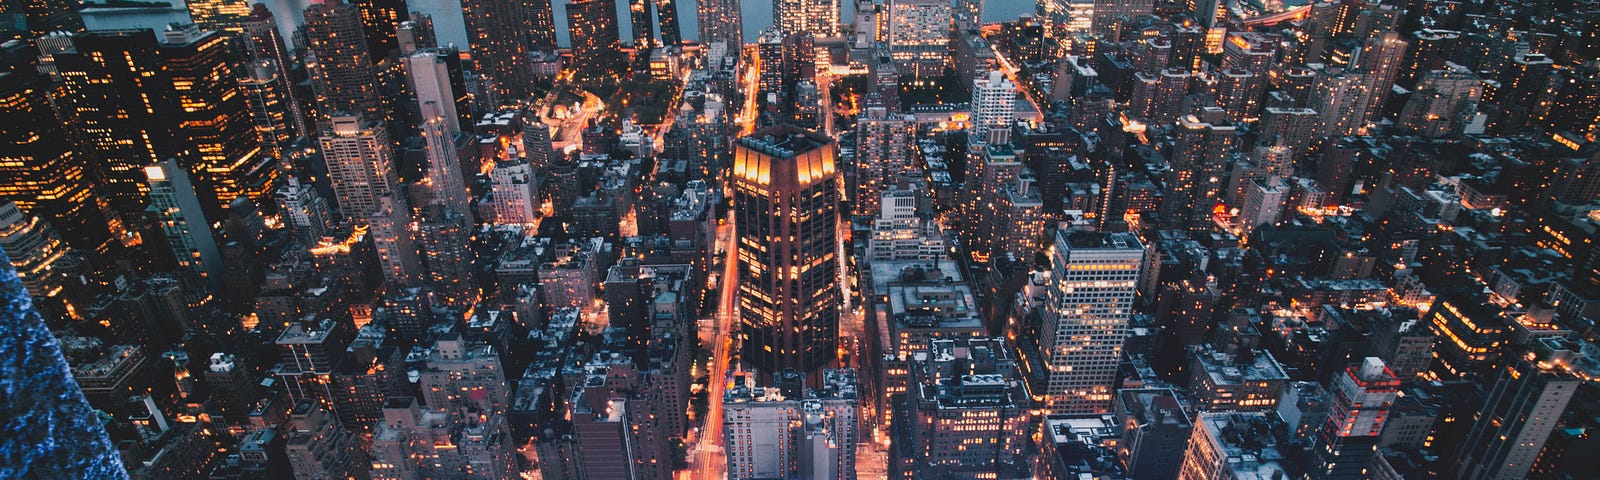 Aerial view of a city lit up at night